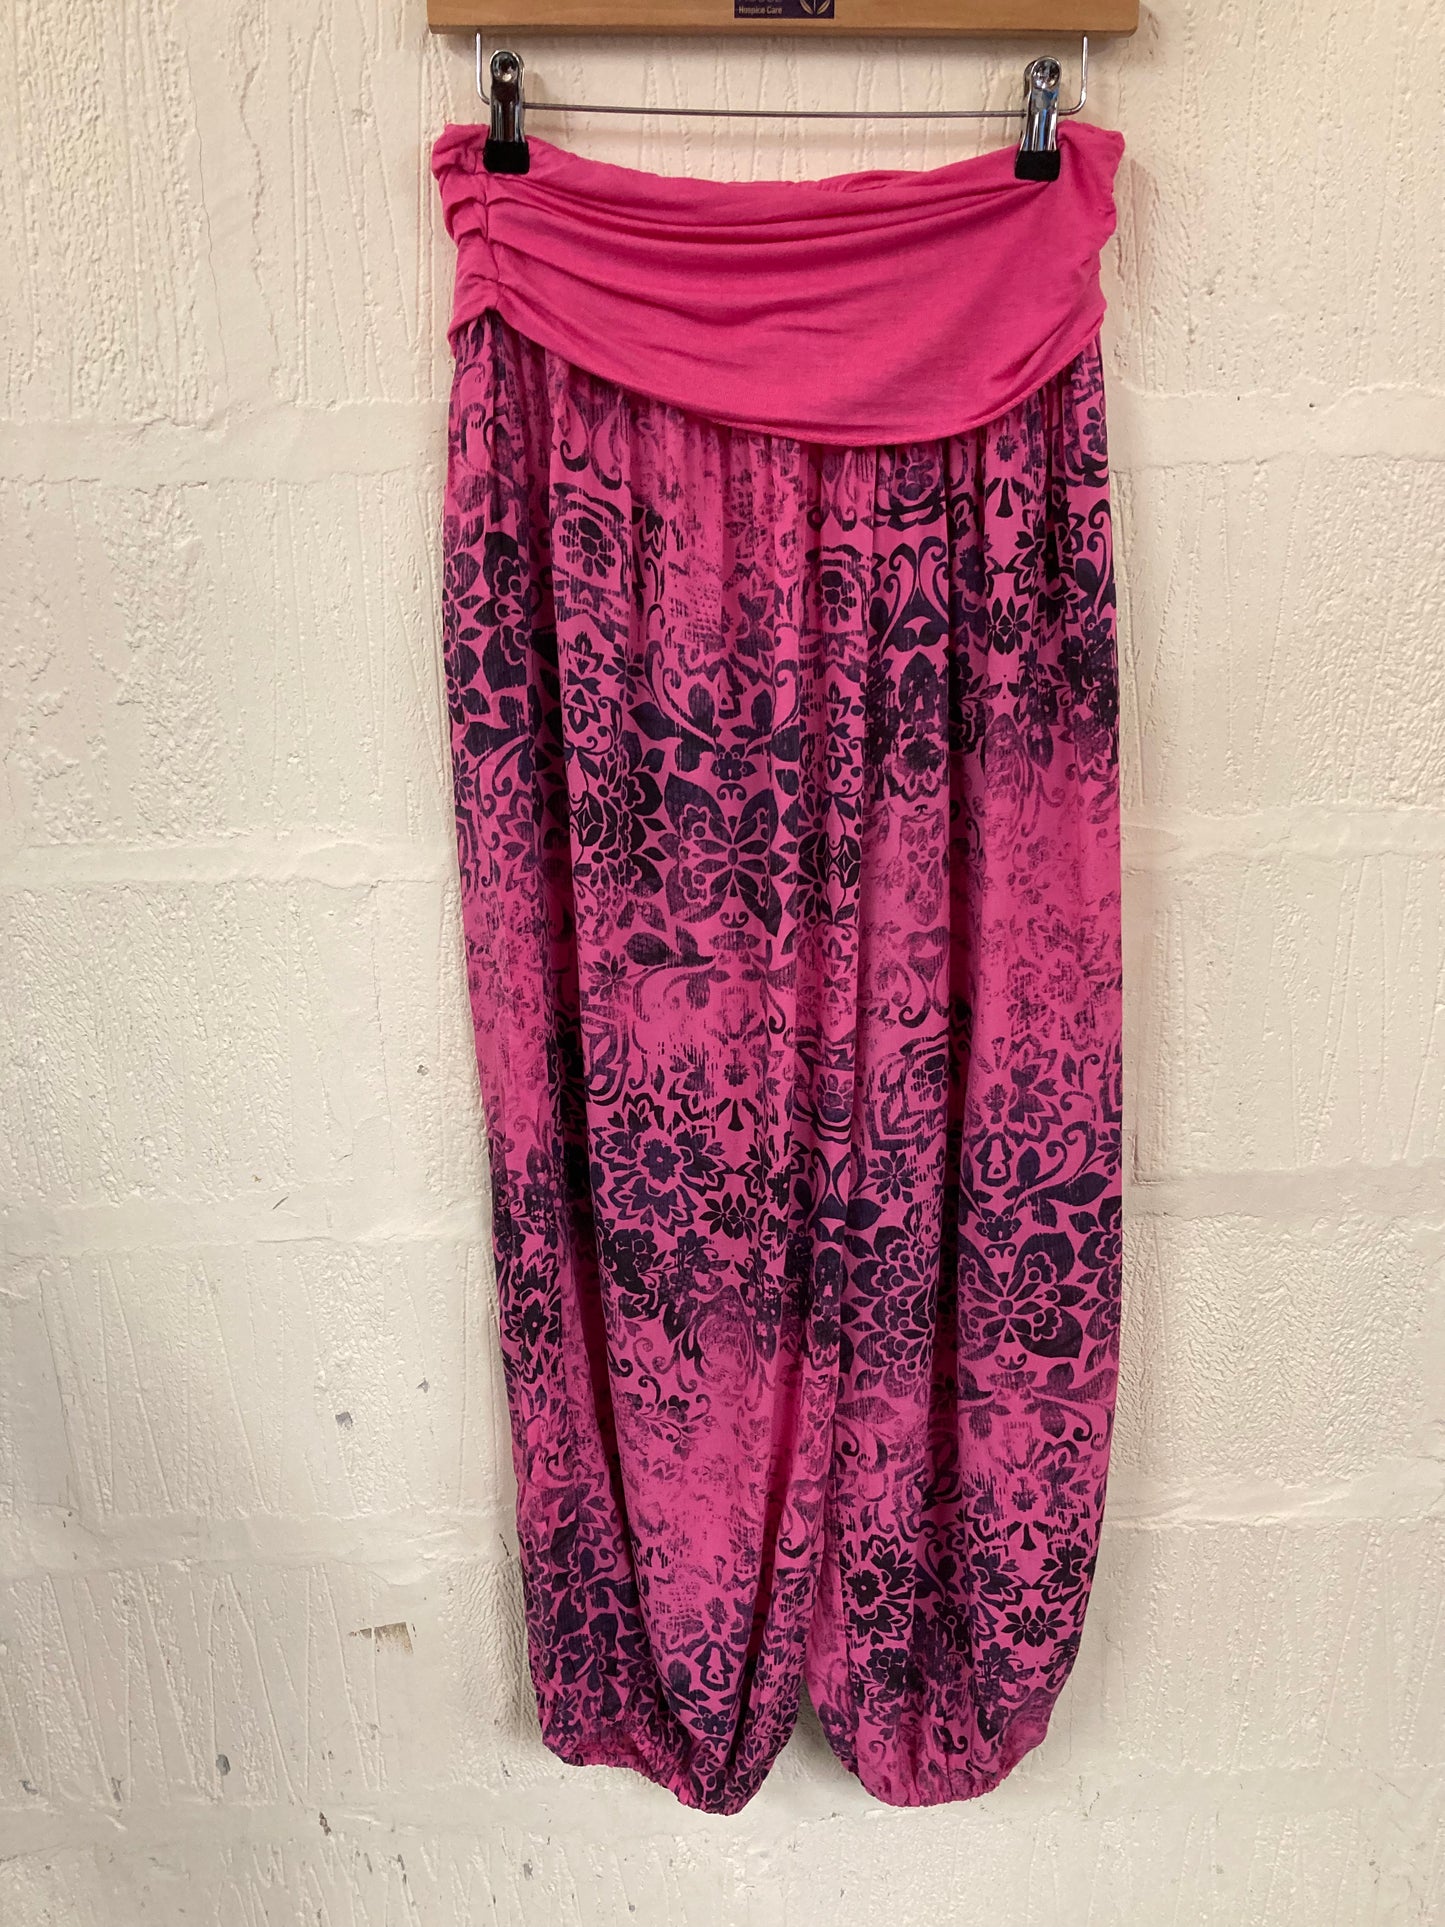 00s Bright Pink with Dappled Floral Pattern Harem Pants Size 8